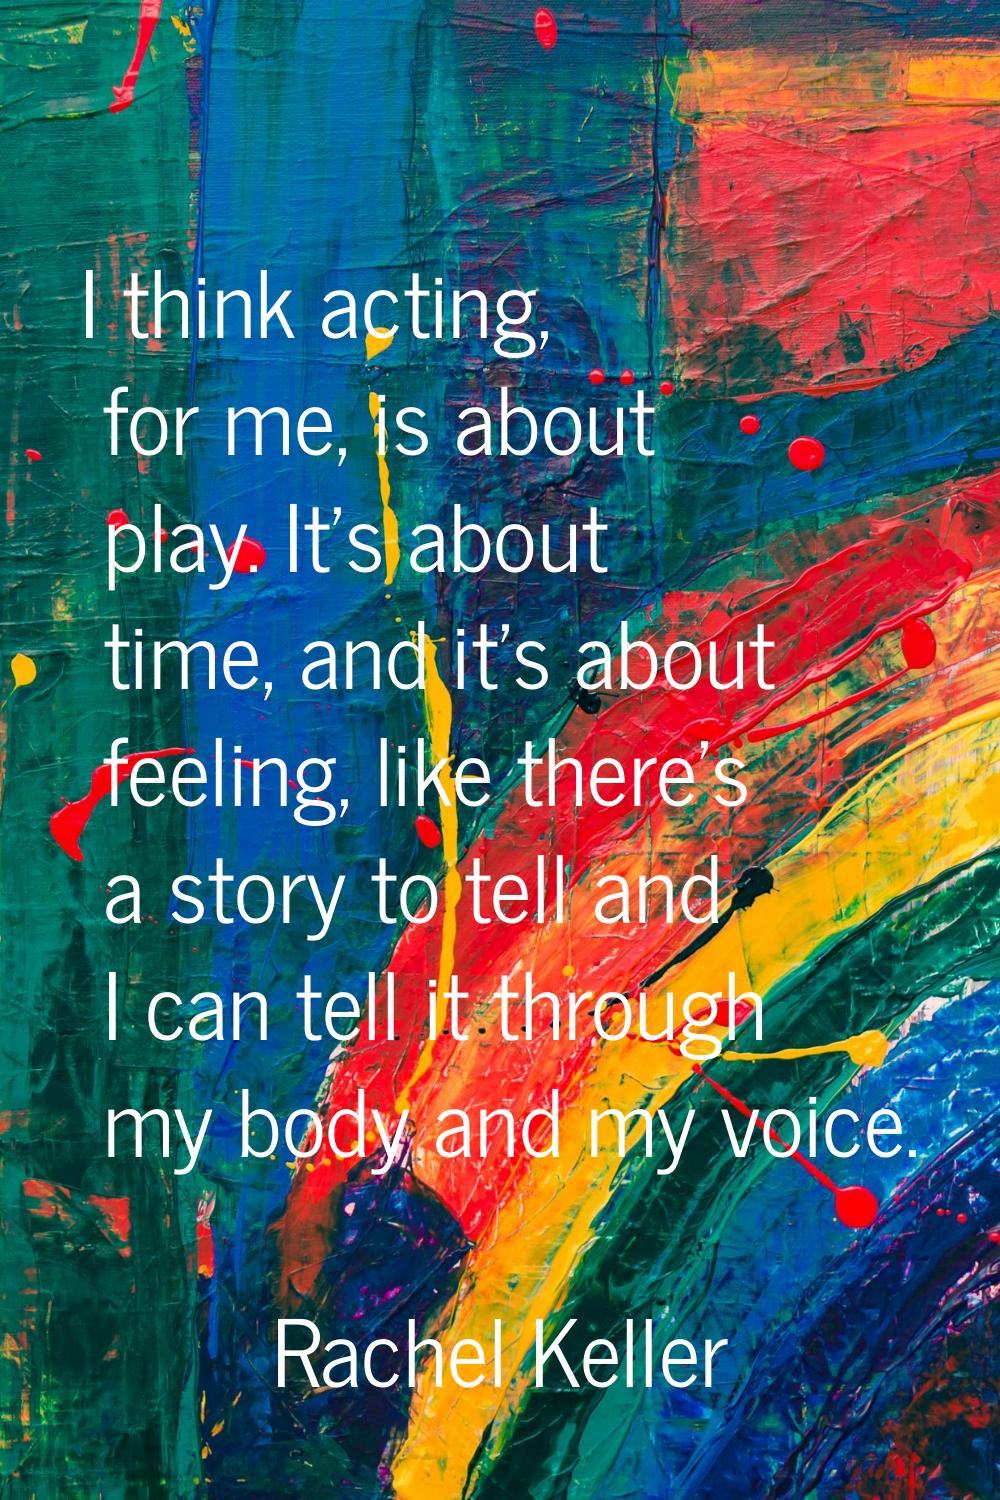 I think acting, for me, is about play. It's about time, and it's about feeling, like there's a stor